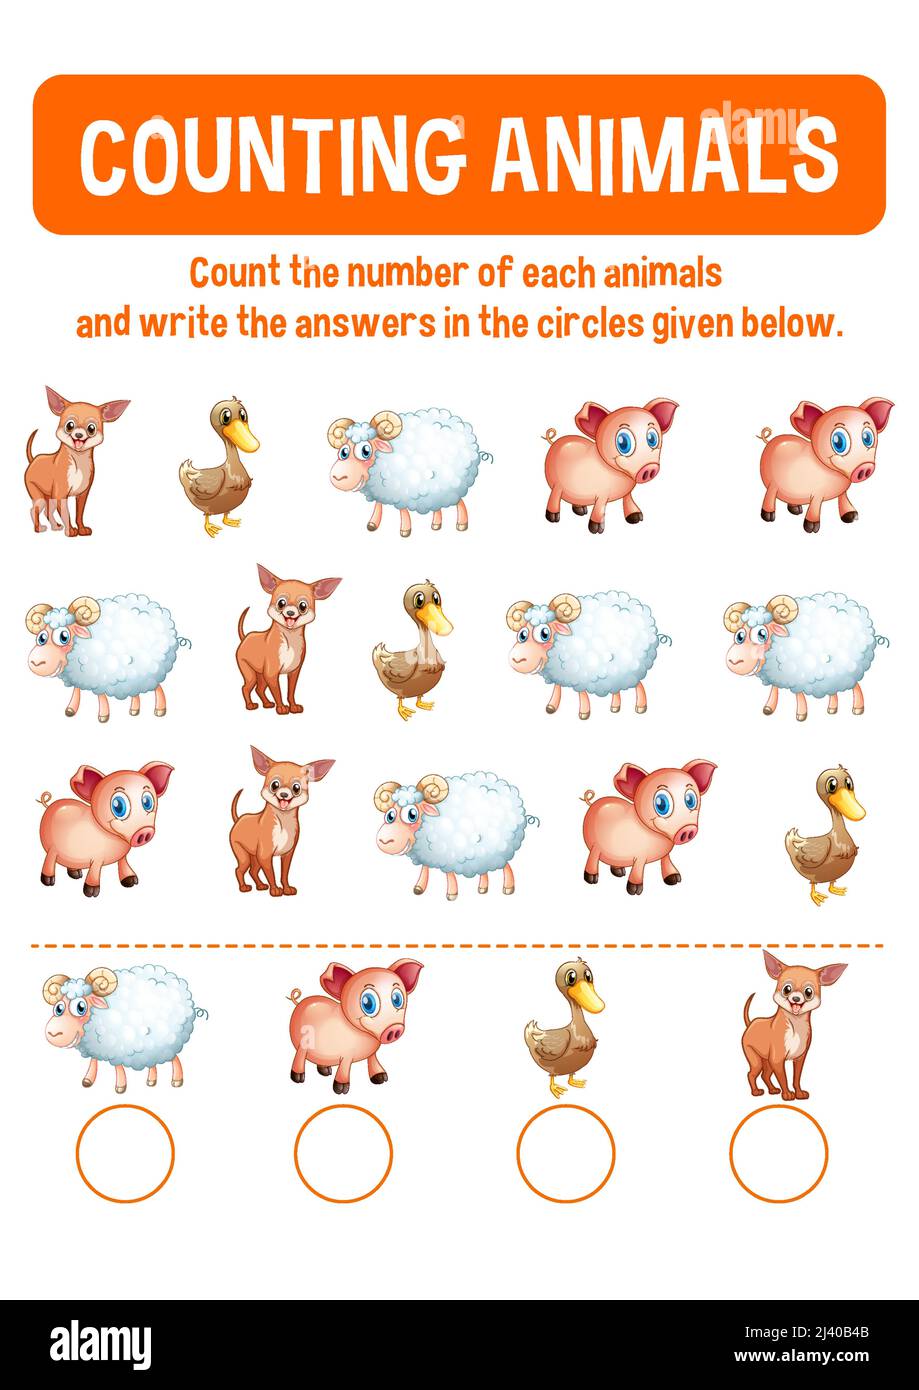 Worksheet design for counting animals illustration Stock Vector